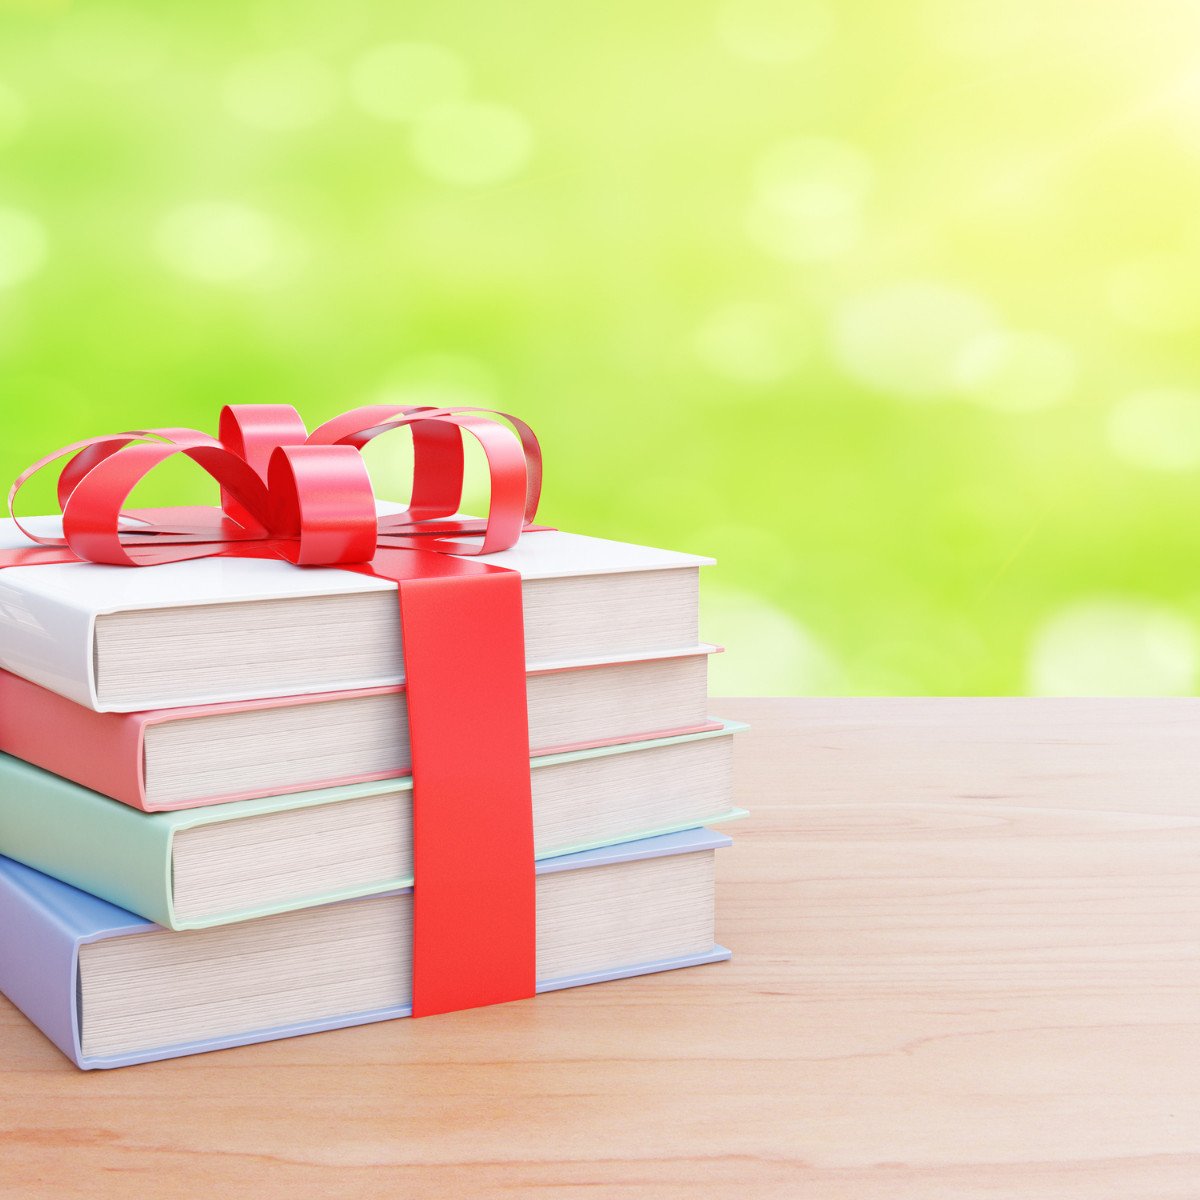 4 Best Book & Audiobook Subscription Gifts Ideas They’ll Love